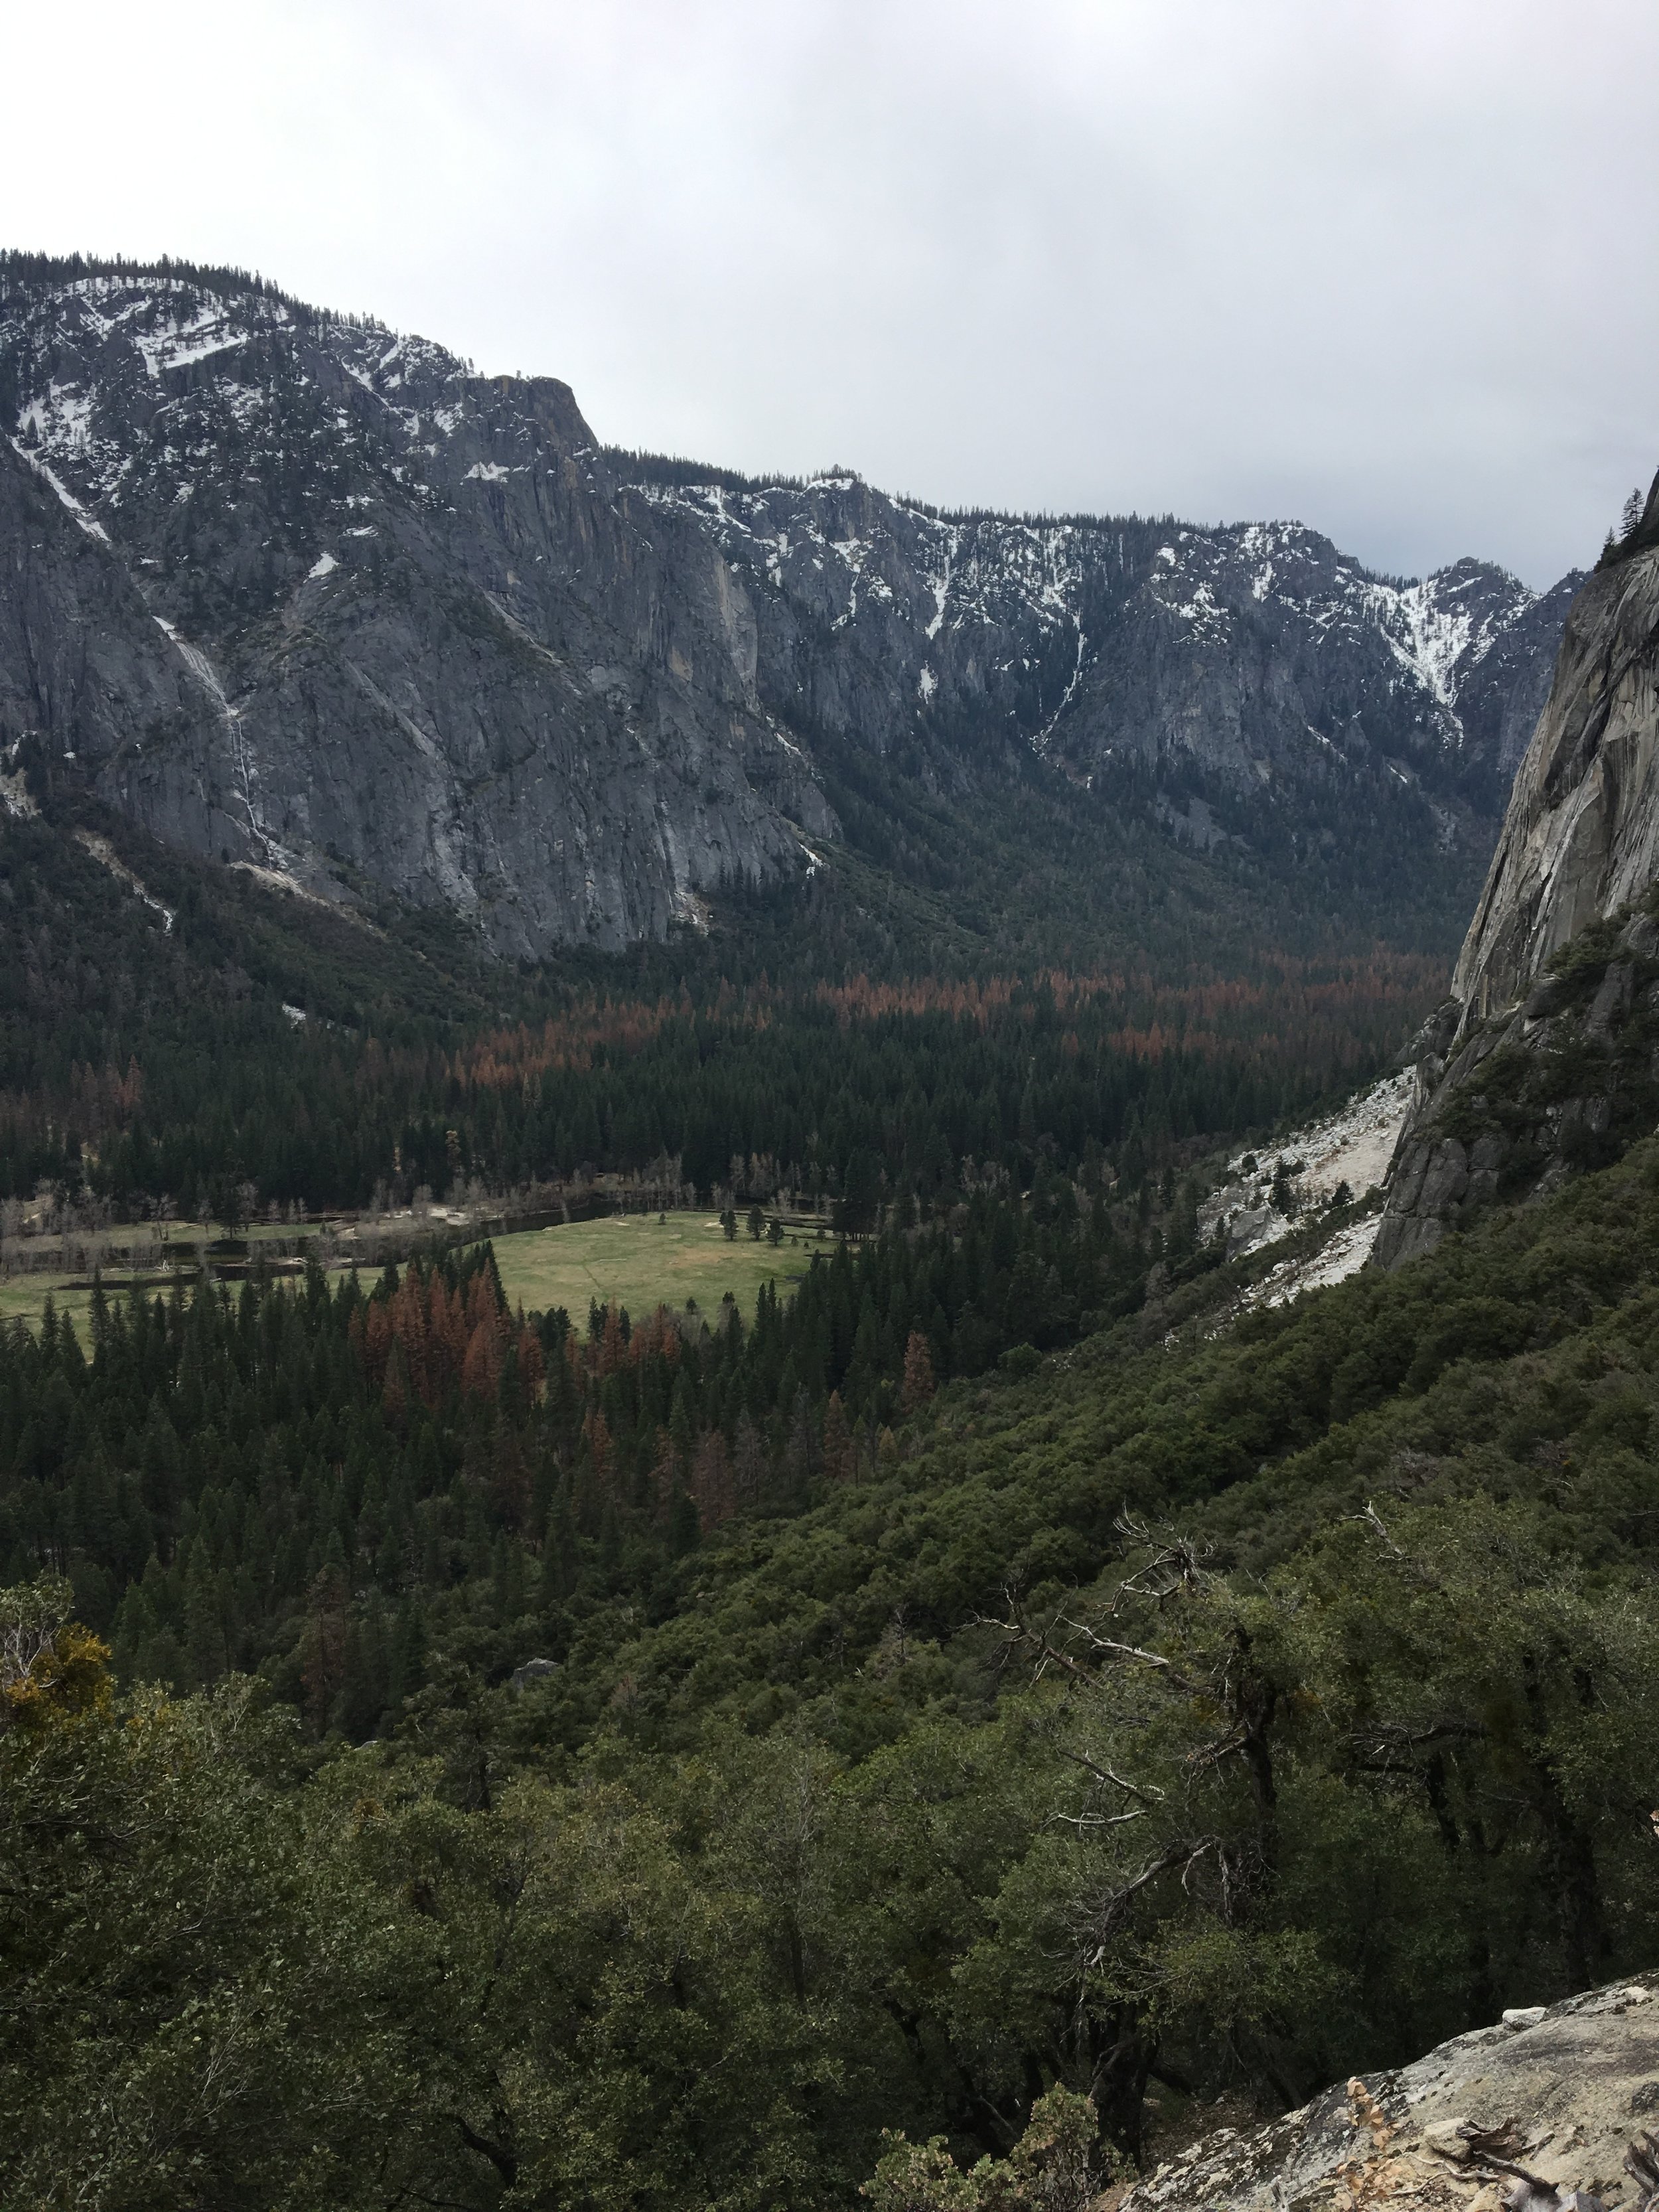  Views from the Yosemite Falls Trail 